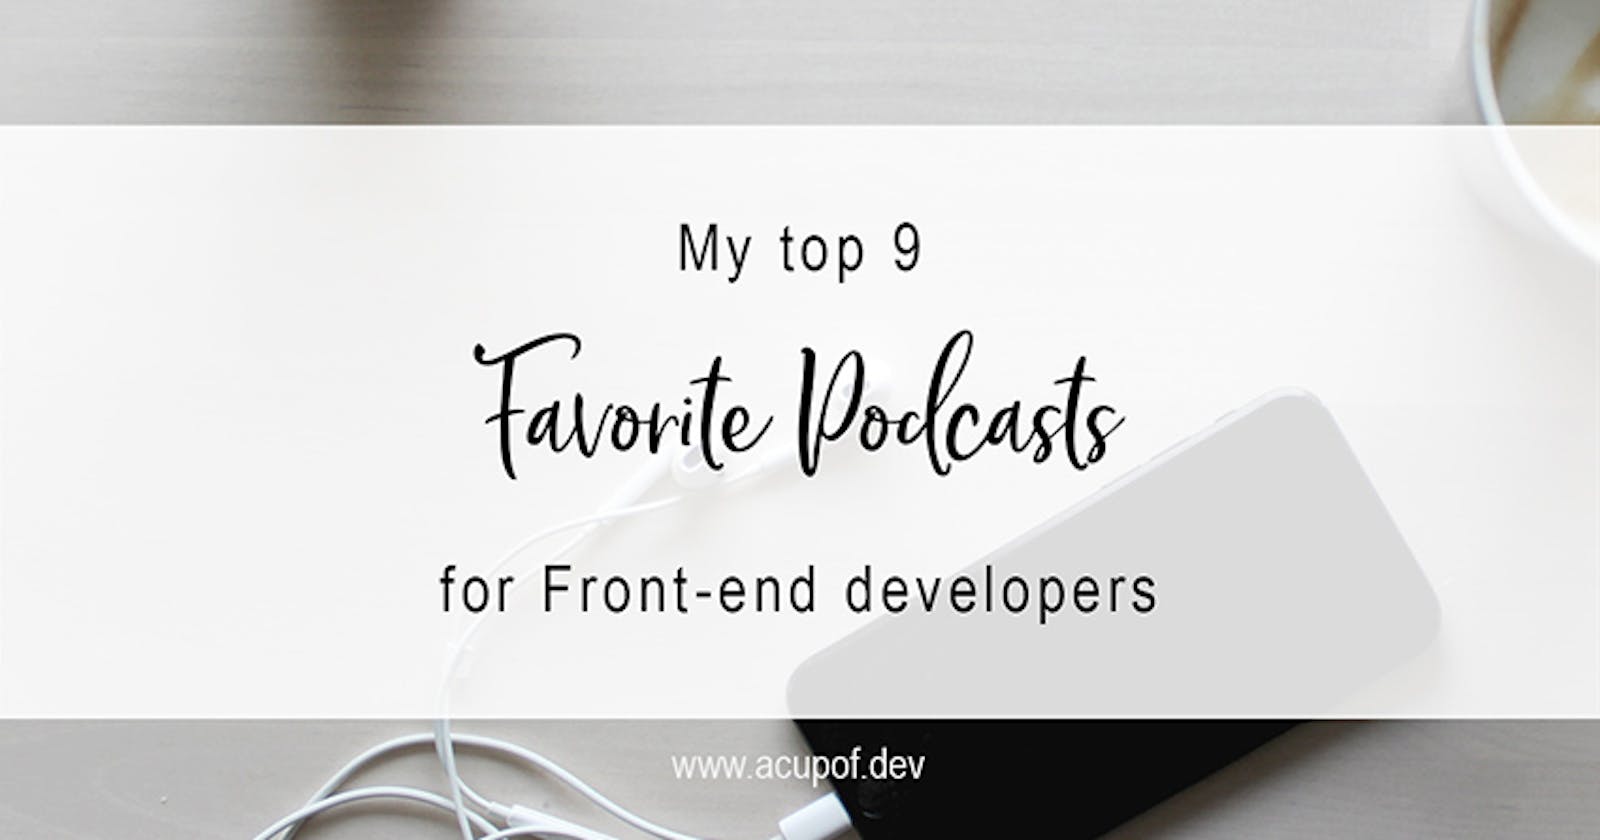 My top 9 favorite podcasts for front-end developers